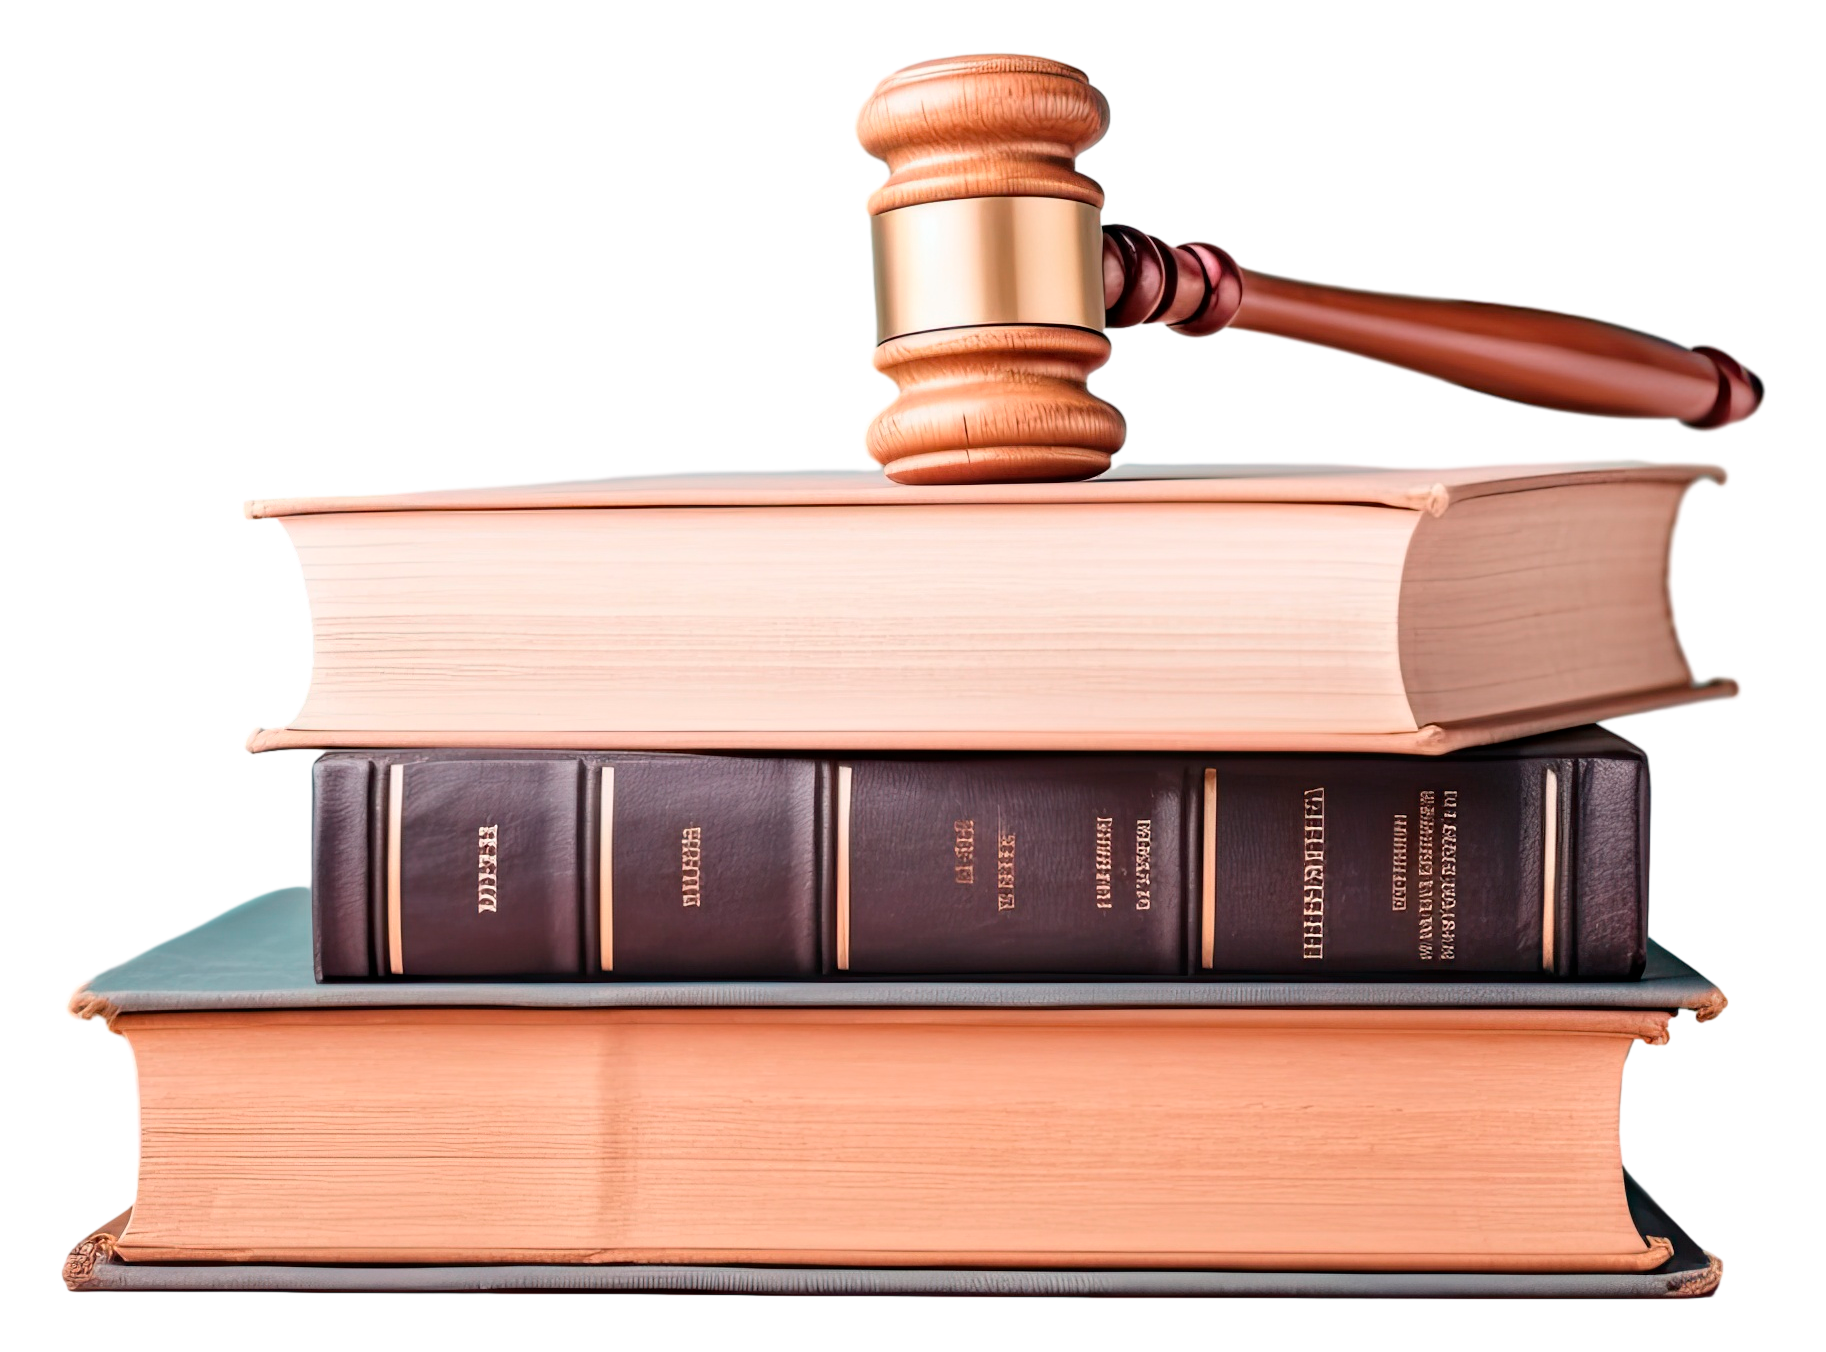 legal_action_with_judge_s_gavel_books_and_transparent_background_space_for_text_g_1_2_1